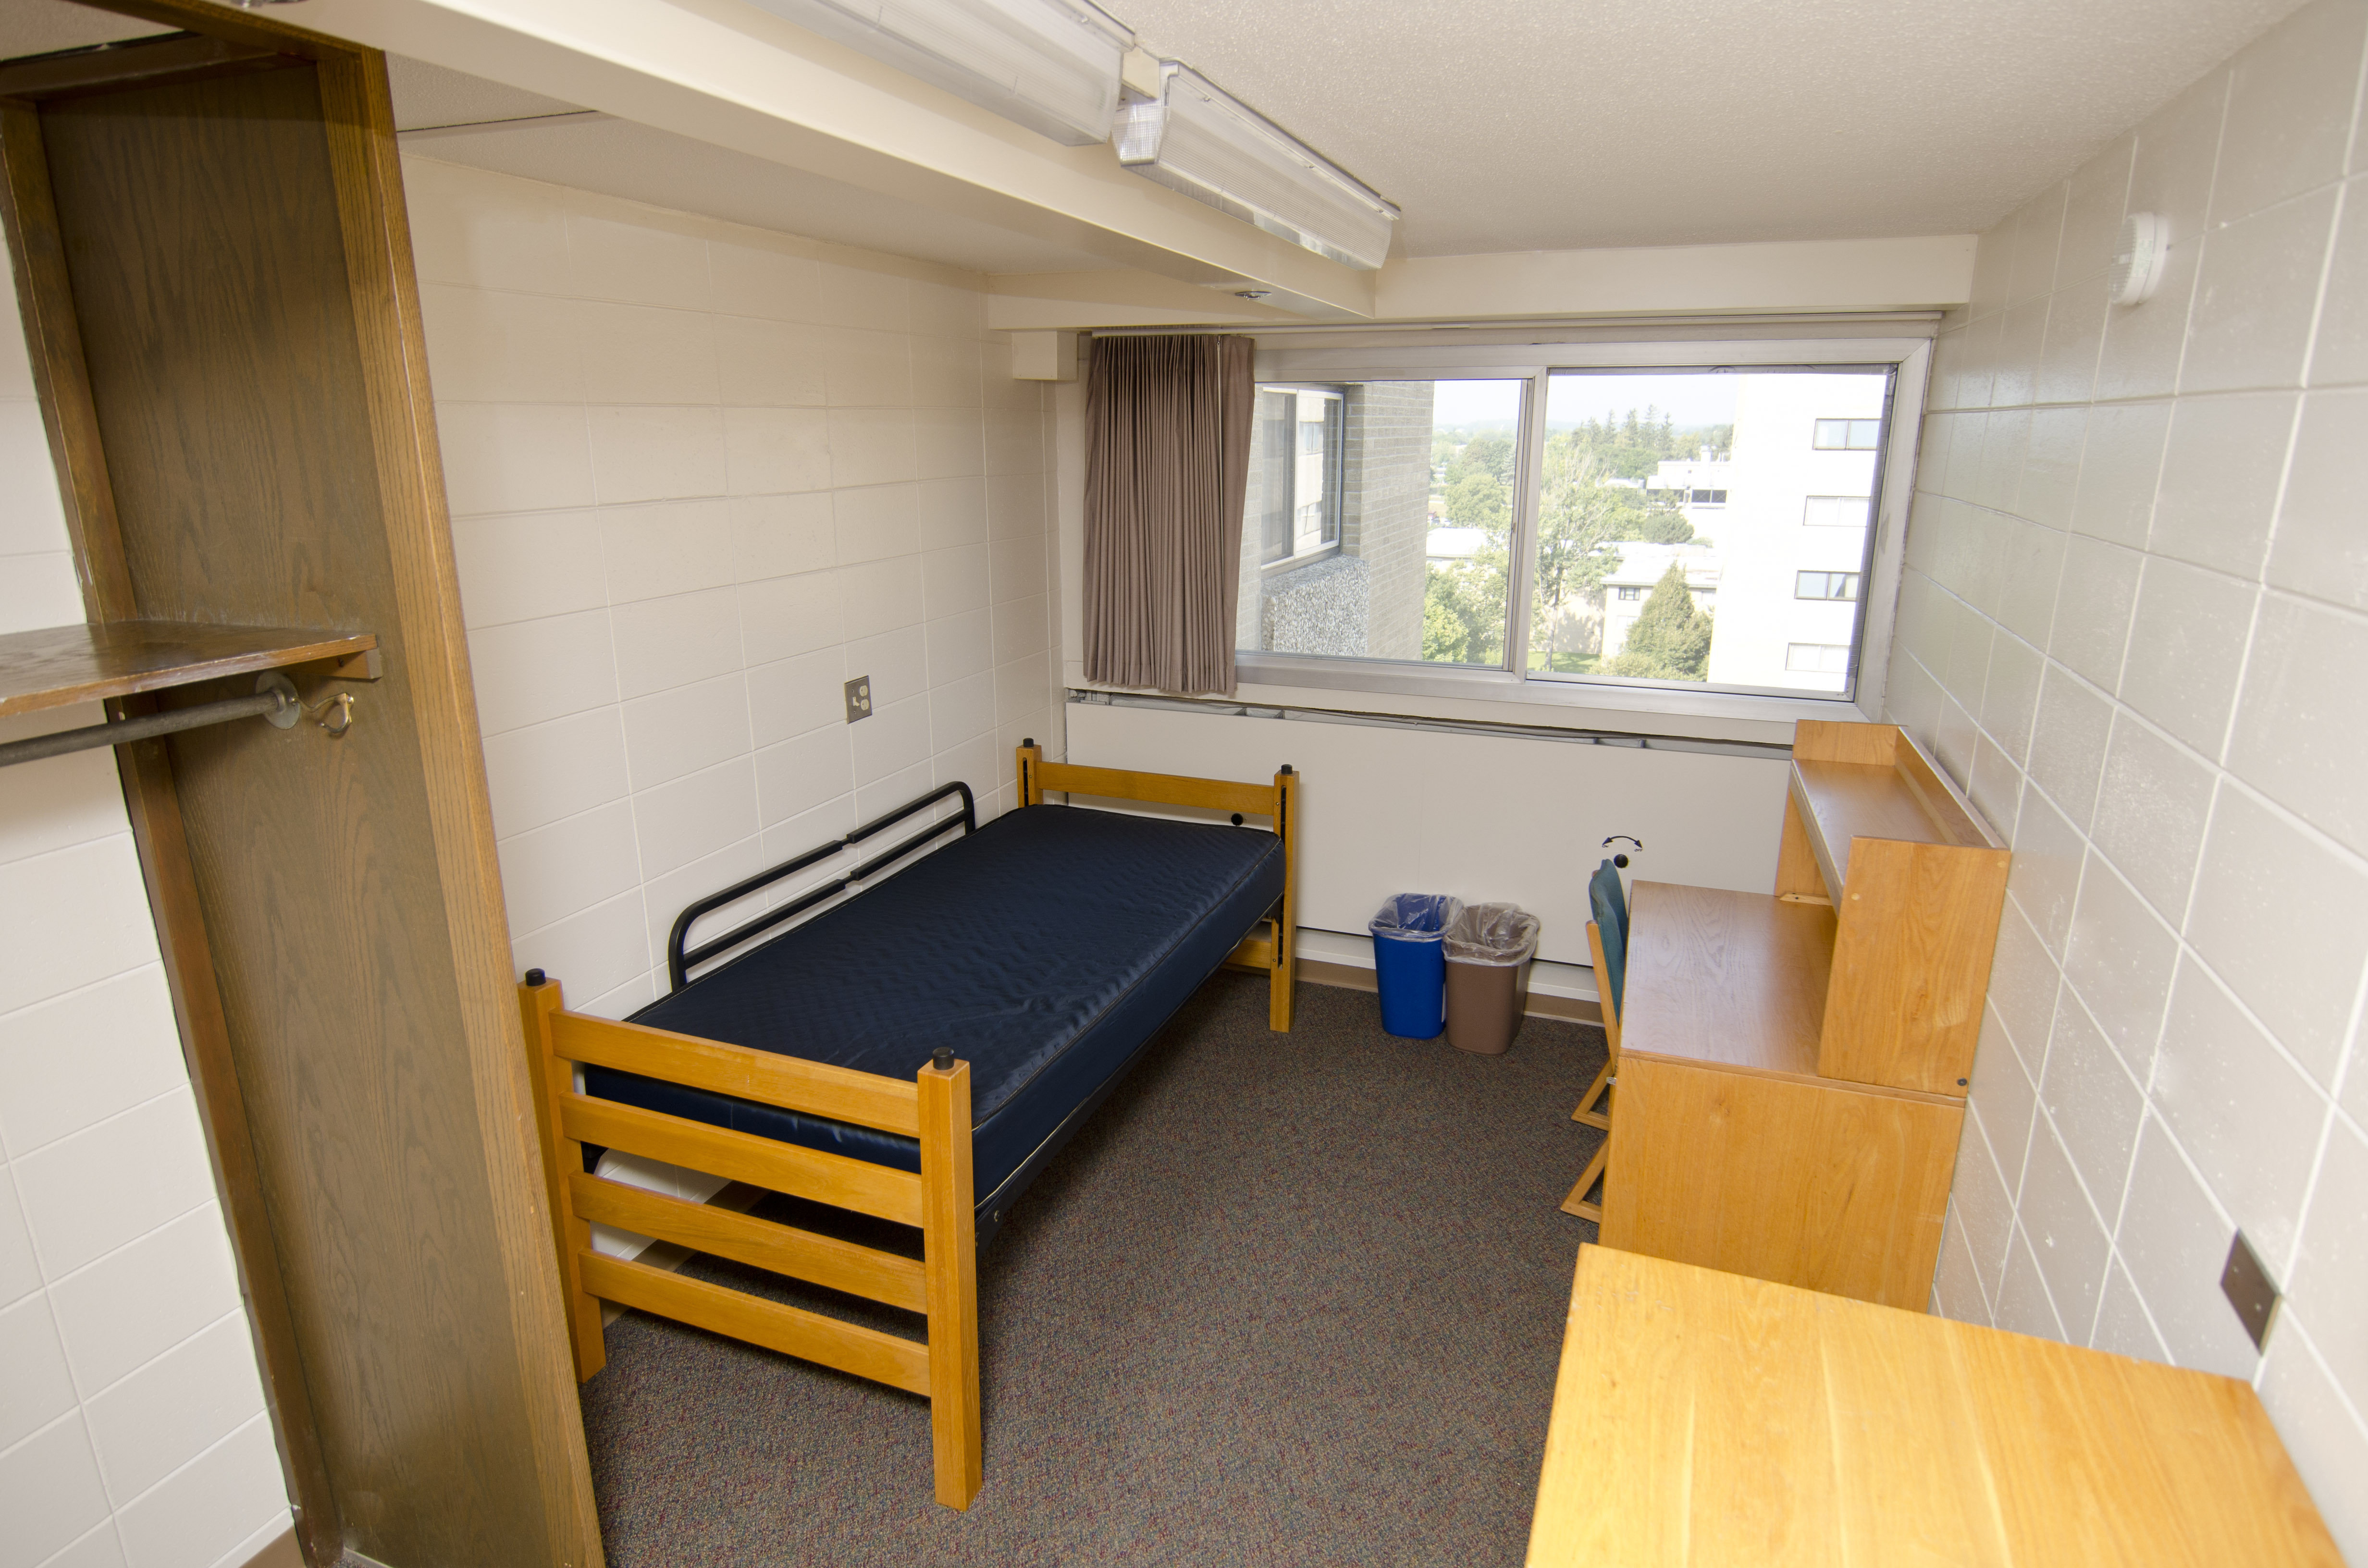 10 College Dorm Room Ideas To Make You Feel More At Home Huffpost